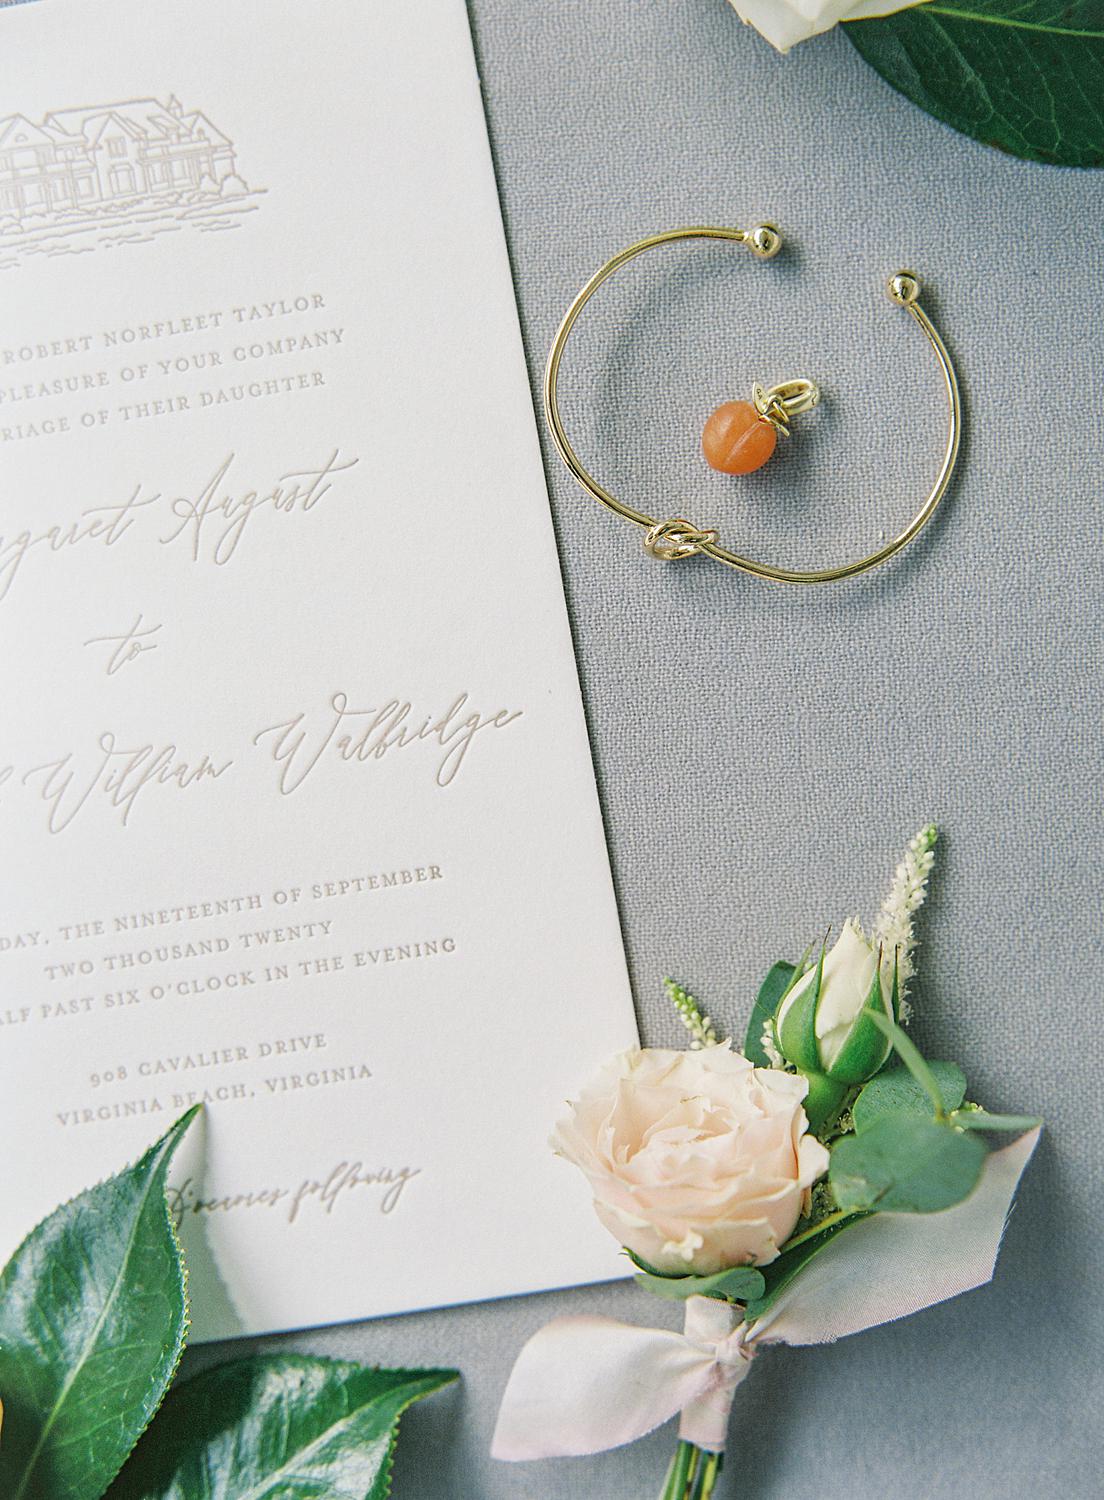 detail images of invitation suite and ring for bride's intimate home wedding